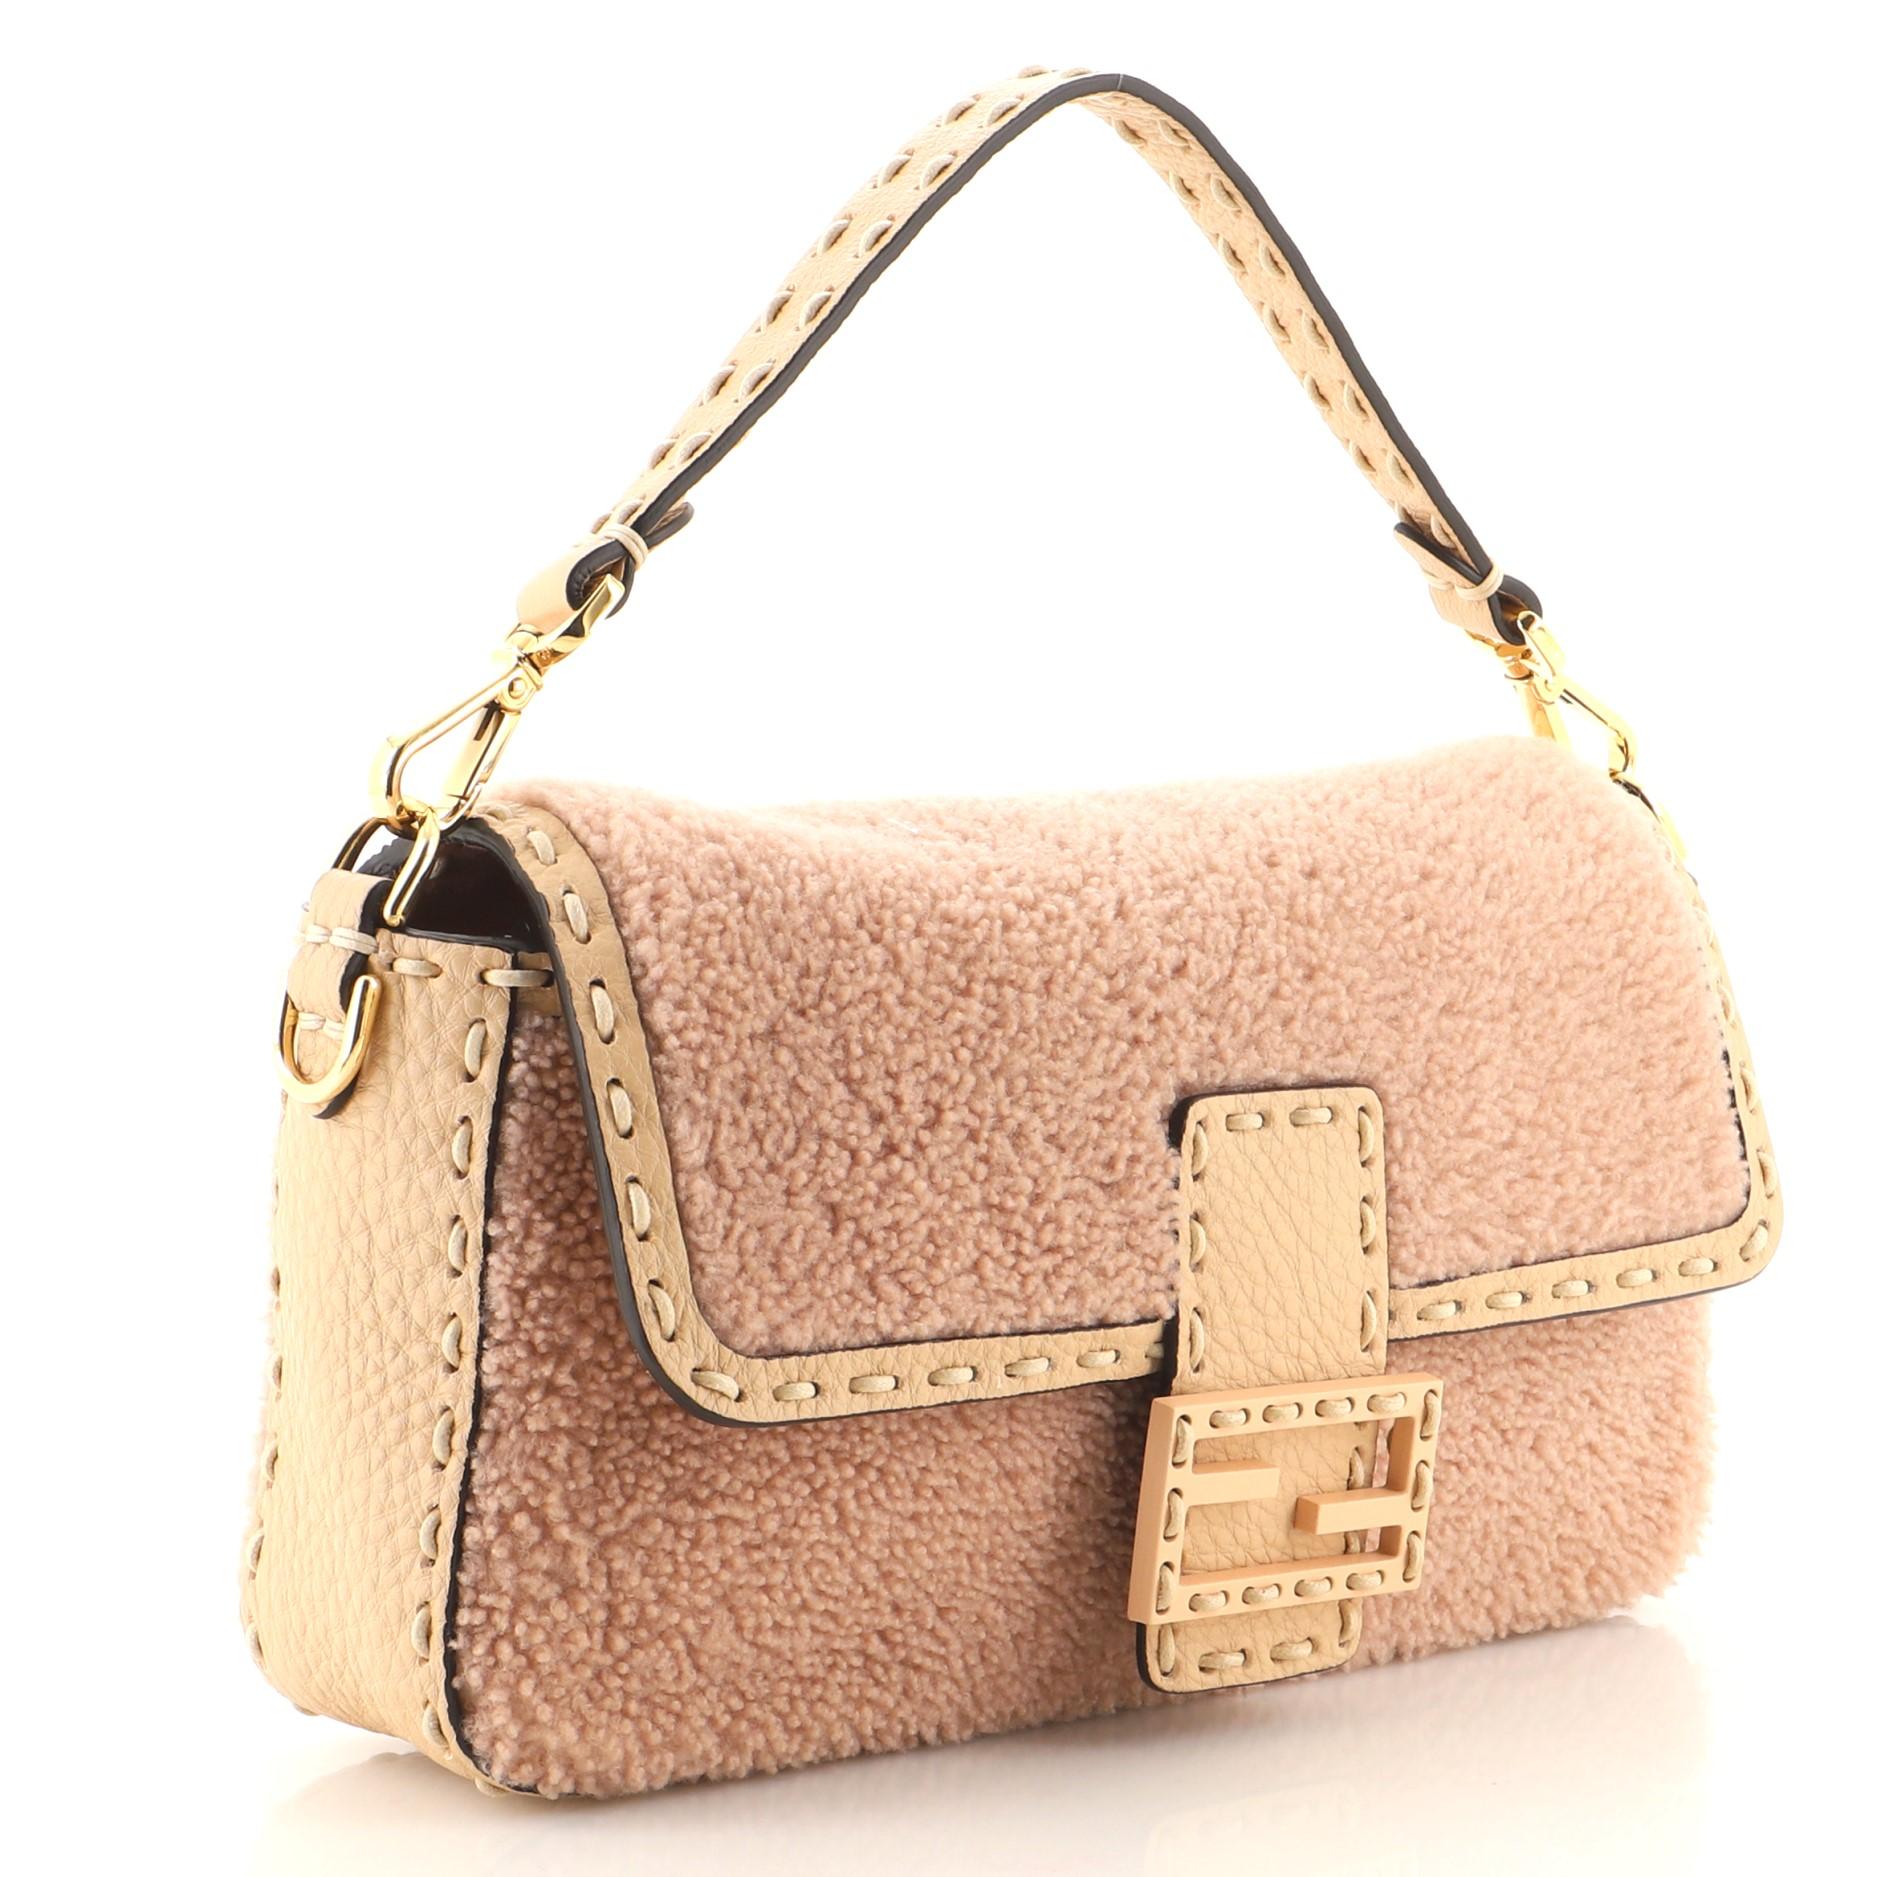 Beige Fendi Baguette NM Bag Shearling with Stitched Leather Medium